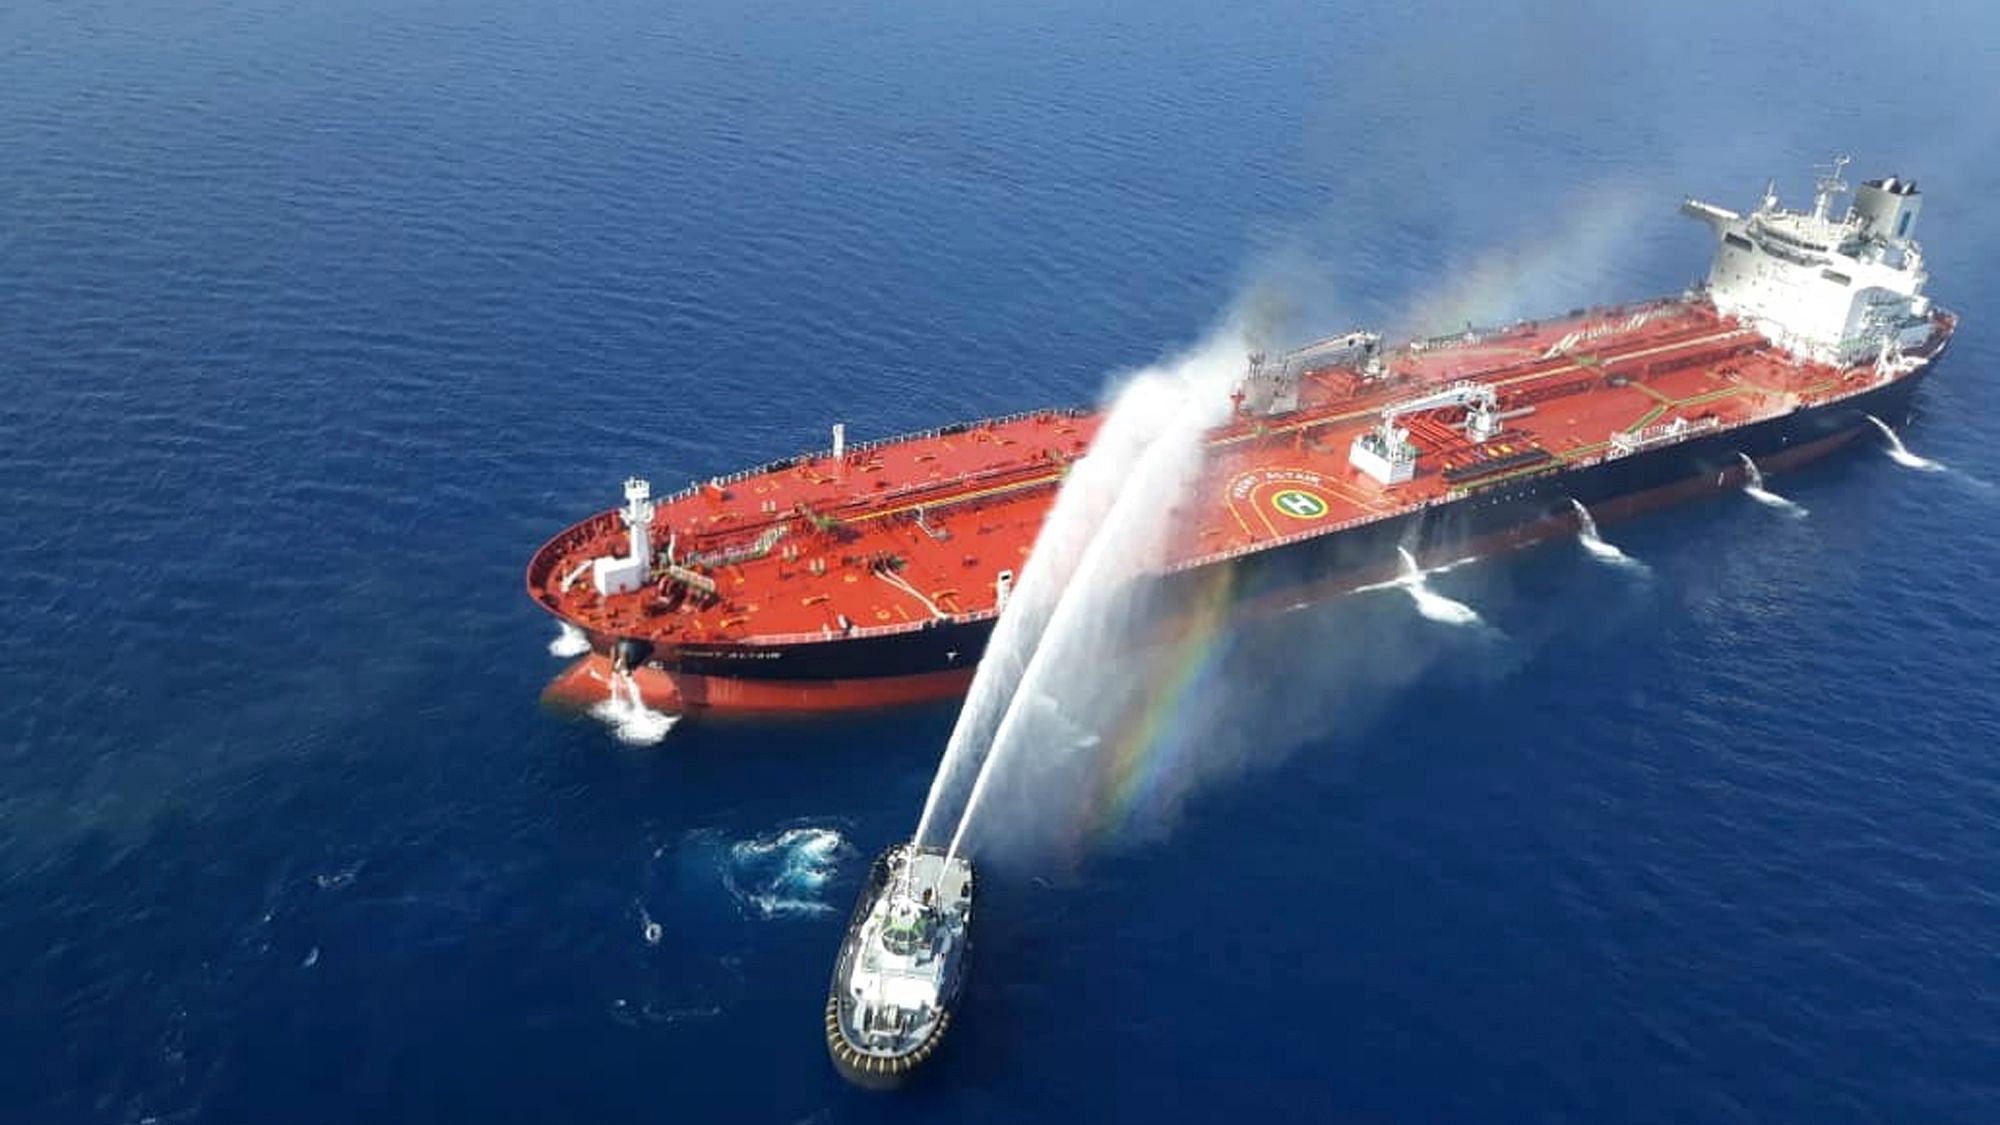 Two oil tankers were attacked on 13 June in the sea of Oman near the Strait of Hormuz.